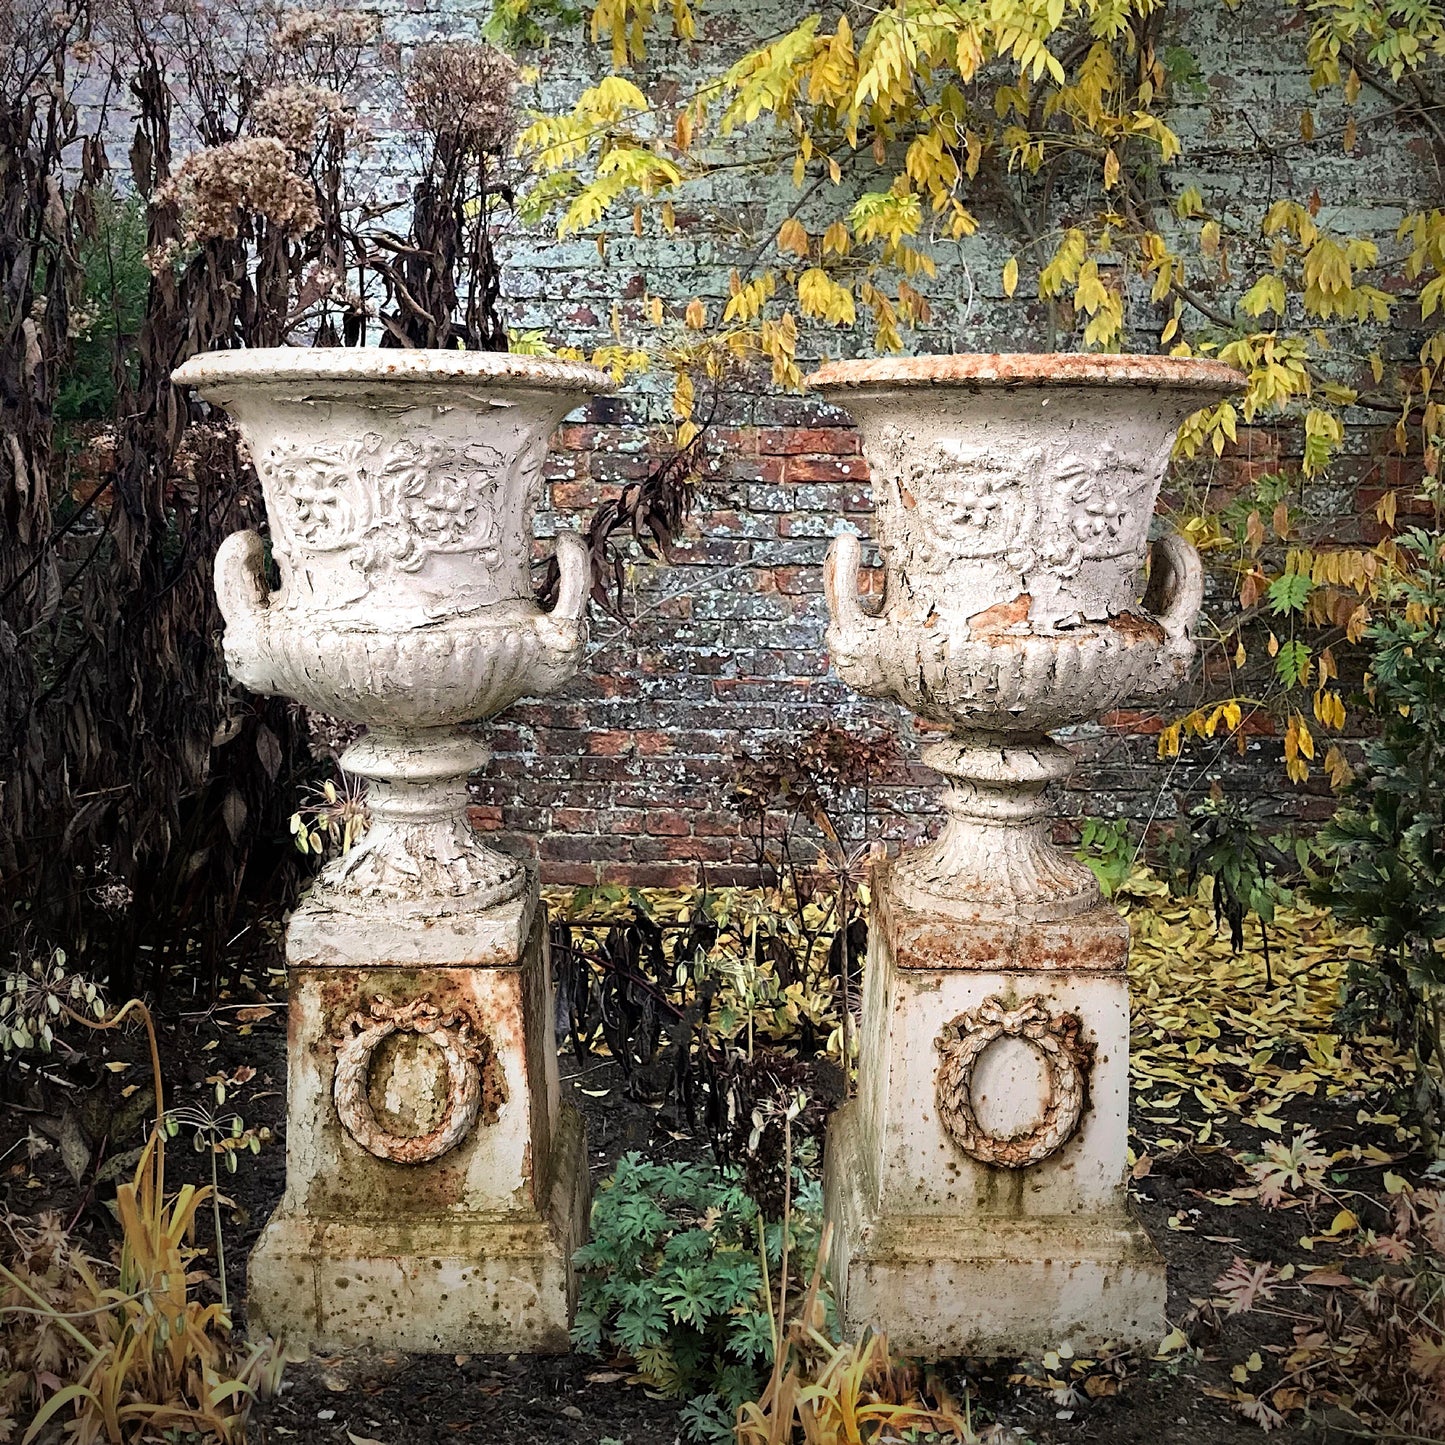 A Pair of Handyside Cast Iron Campana Urns with Plinths c.1870s